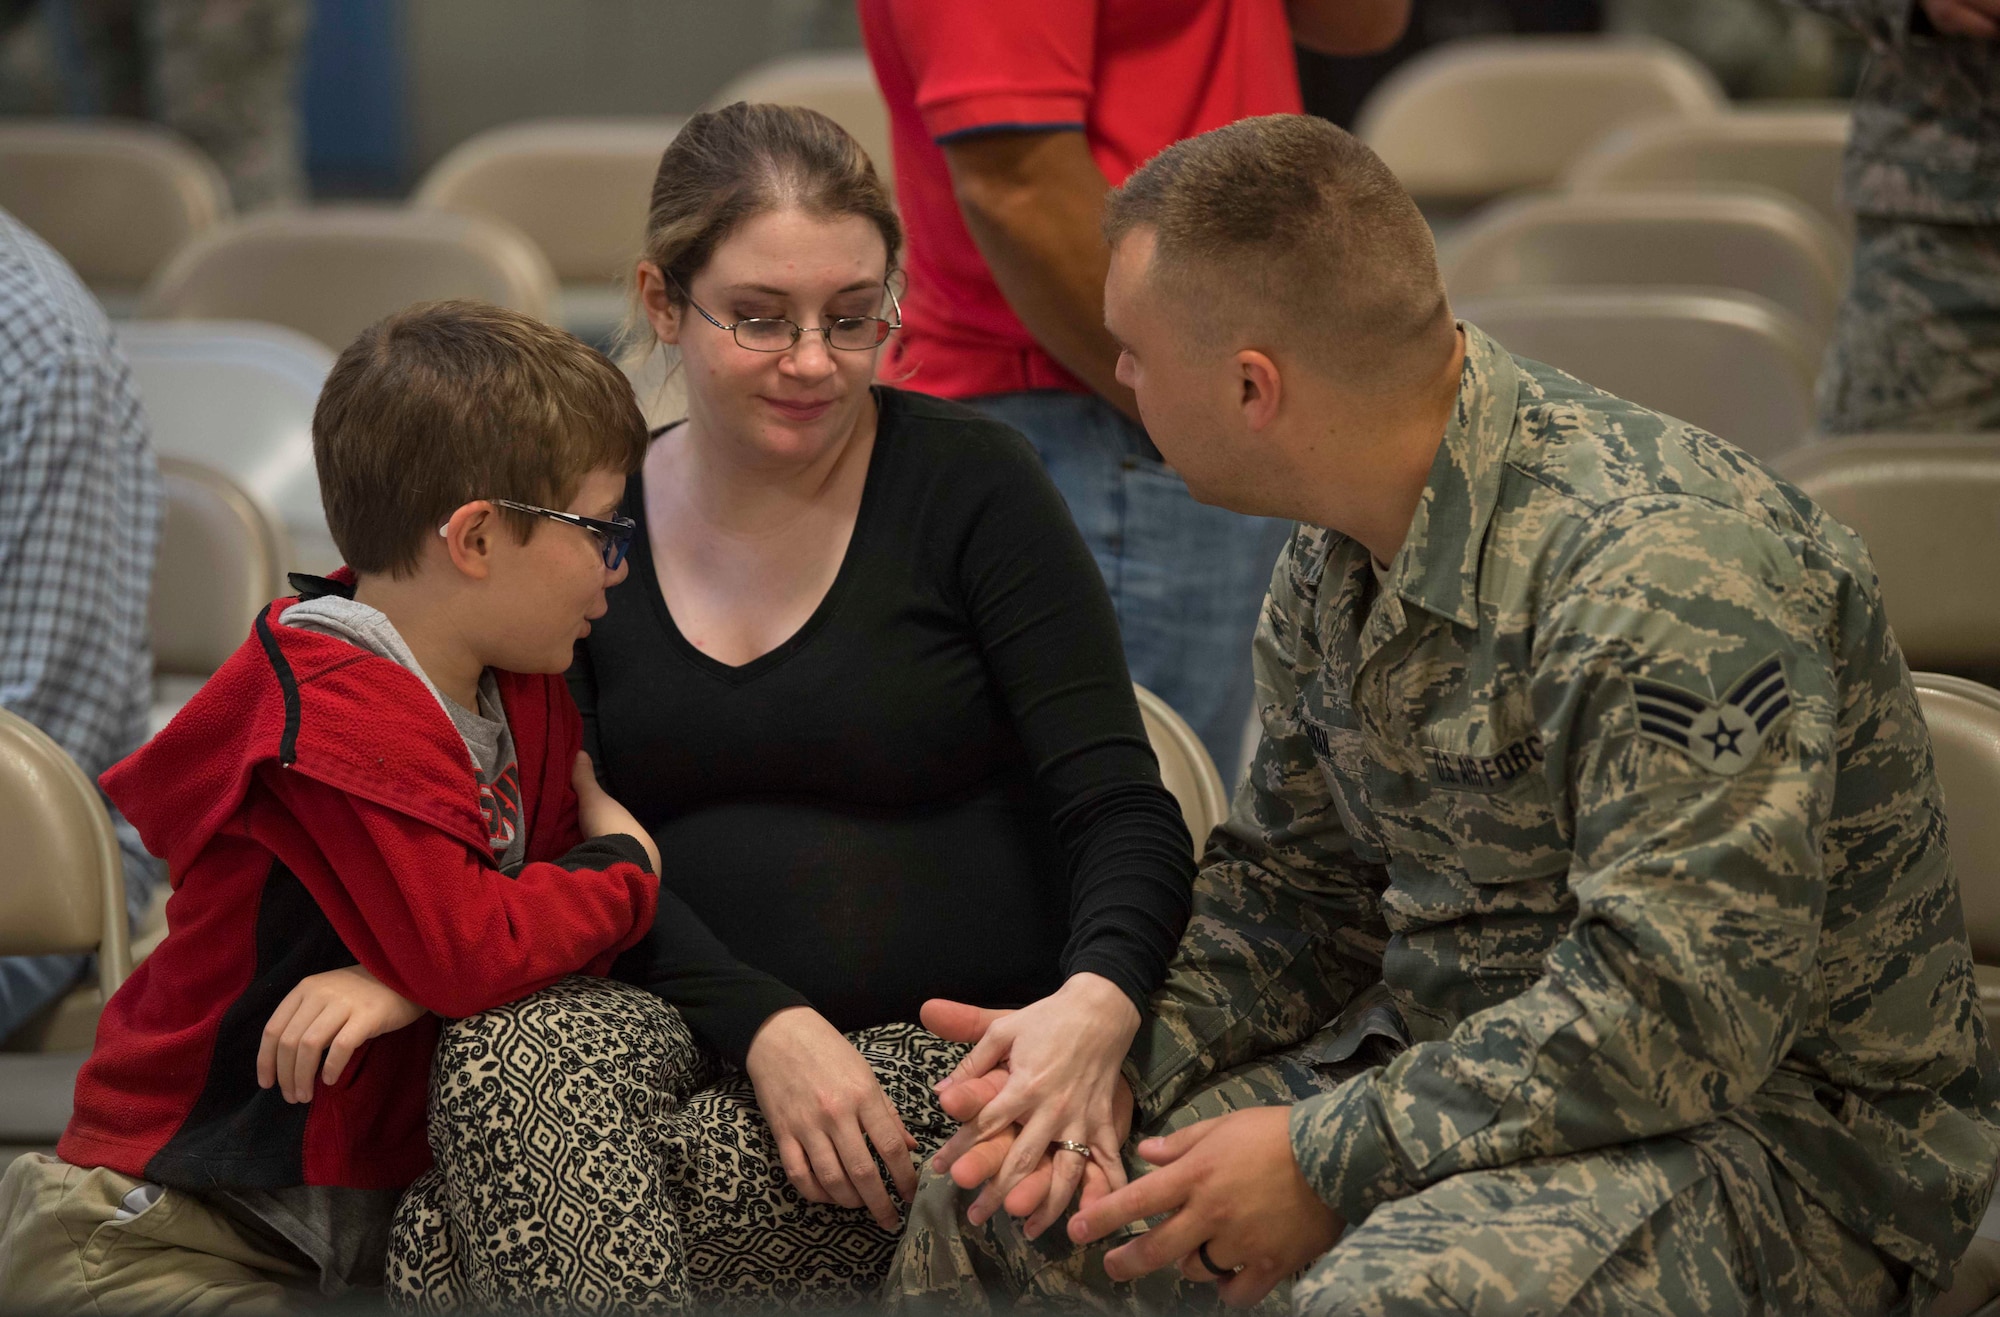 Senior Airman Gary Norman, consoles his wife, Emily, and son Shay prior to deploying in support of Operation Freedom’s Sentinel on June 25, 2017, at McLaughlin Air National Guard Base, Charleston, W.Va. Norman is an electrical environmental maintainer with the 130th Airlift Wing. (U.S. Air National Guard photo by Tech. Sgt. De-Juan Haley)